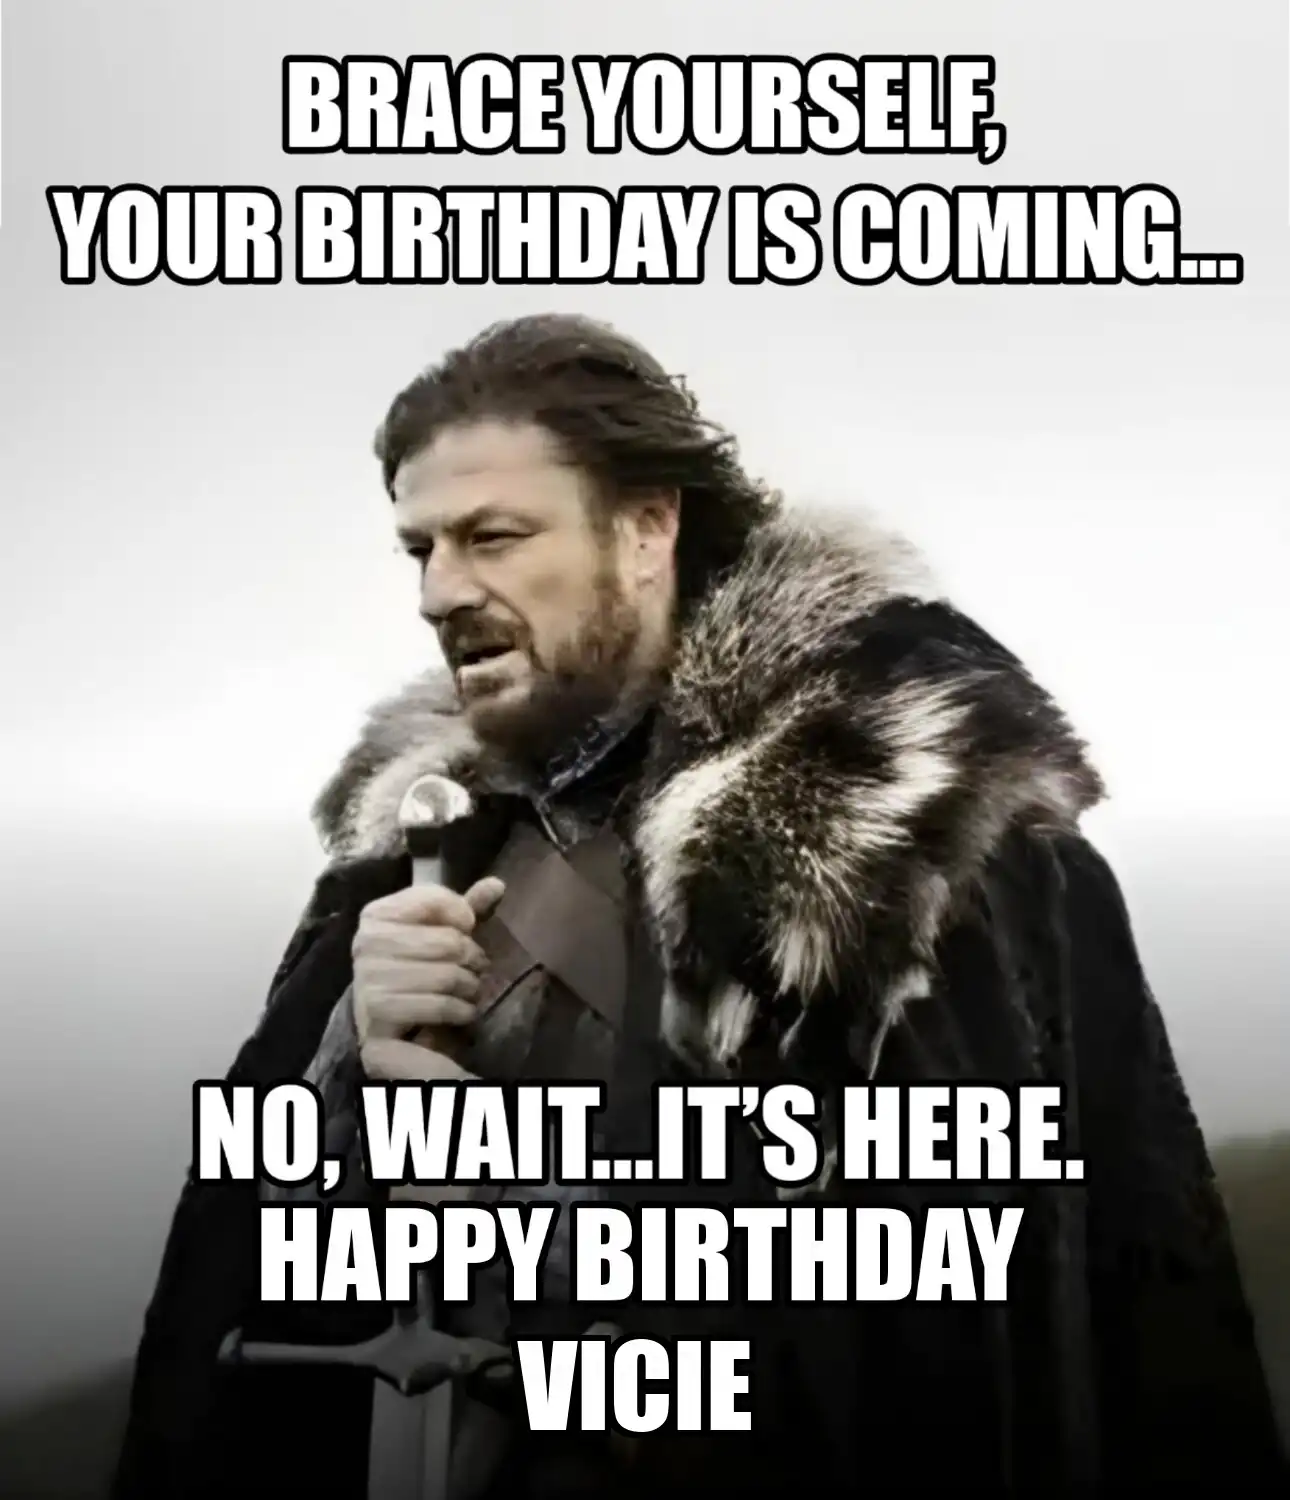 Happy Birthday Vicie Brace Yourself Your Birthday Is Coming Meme